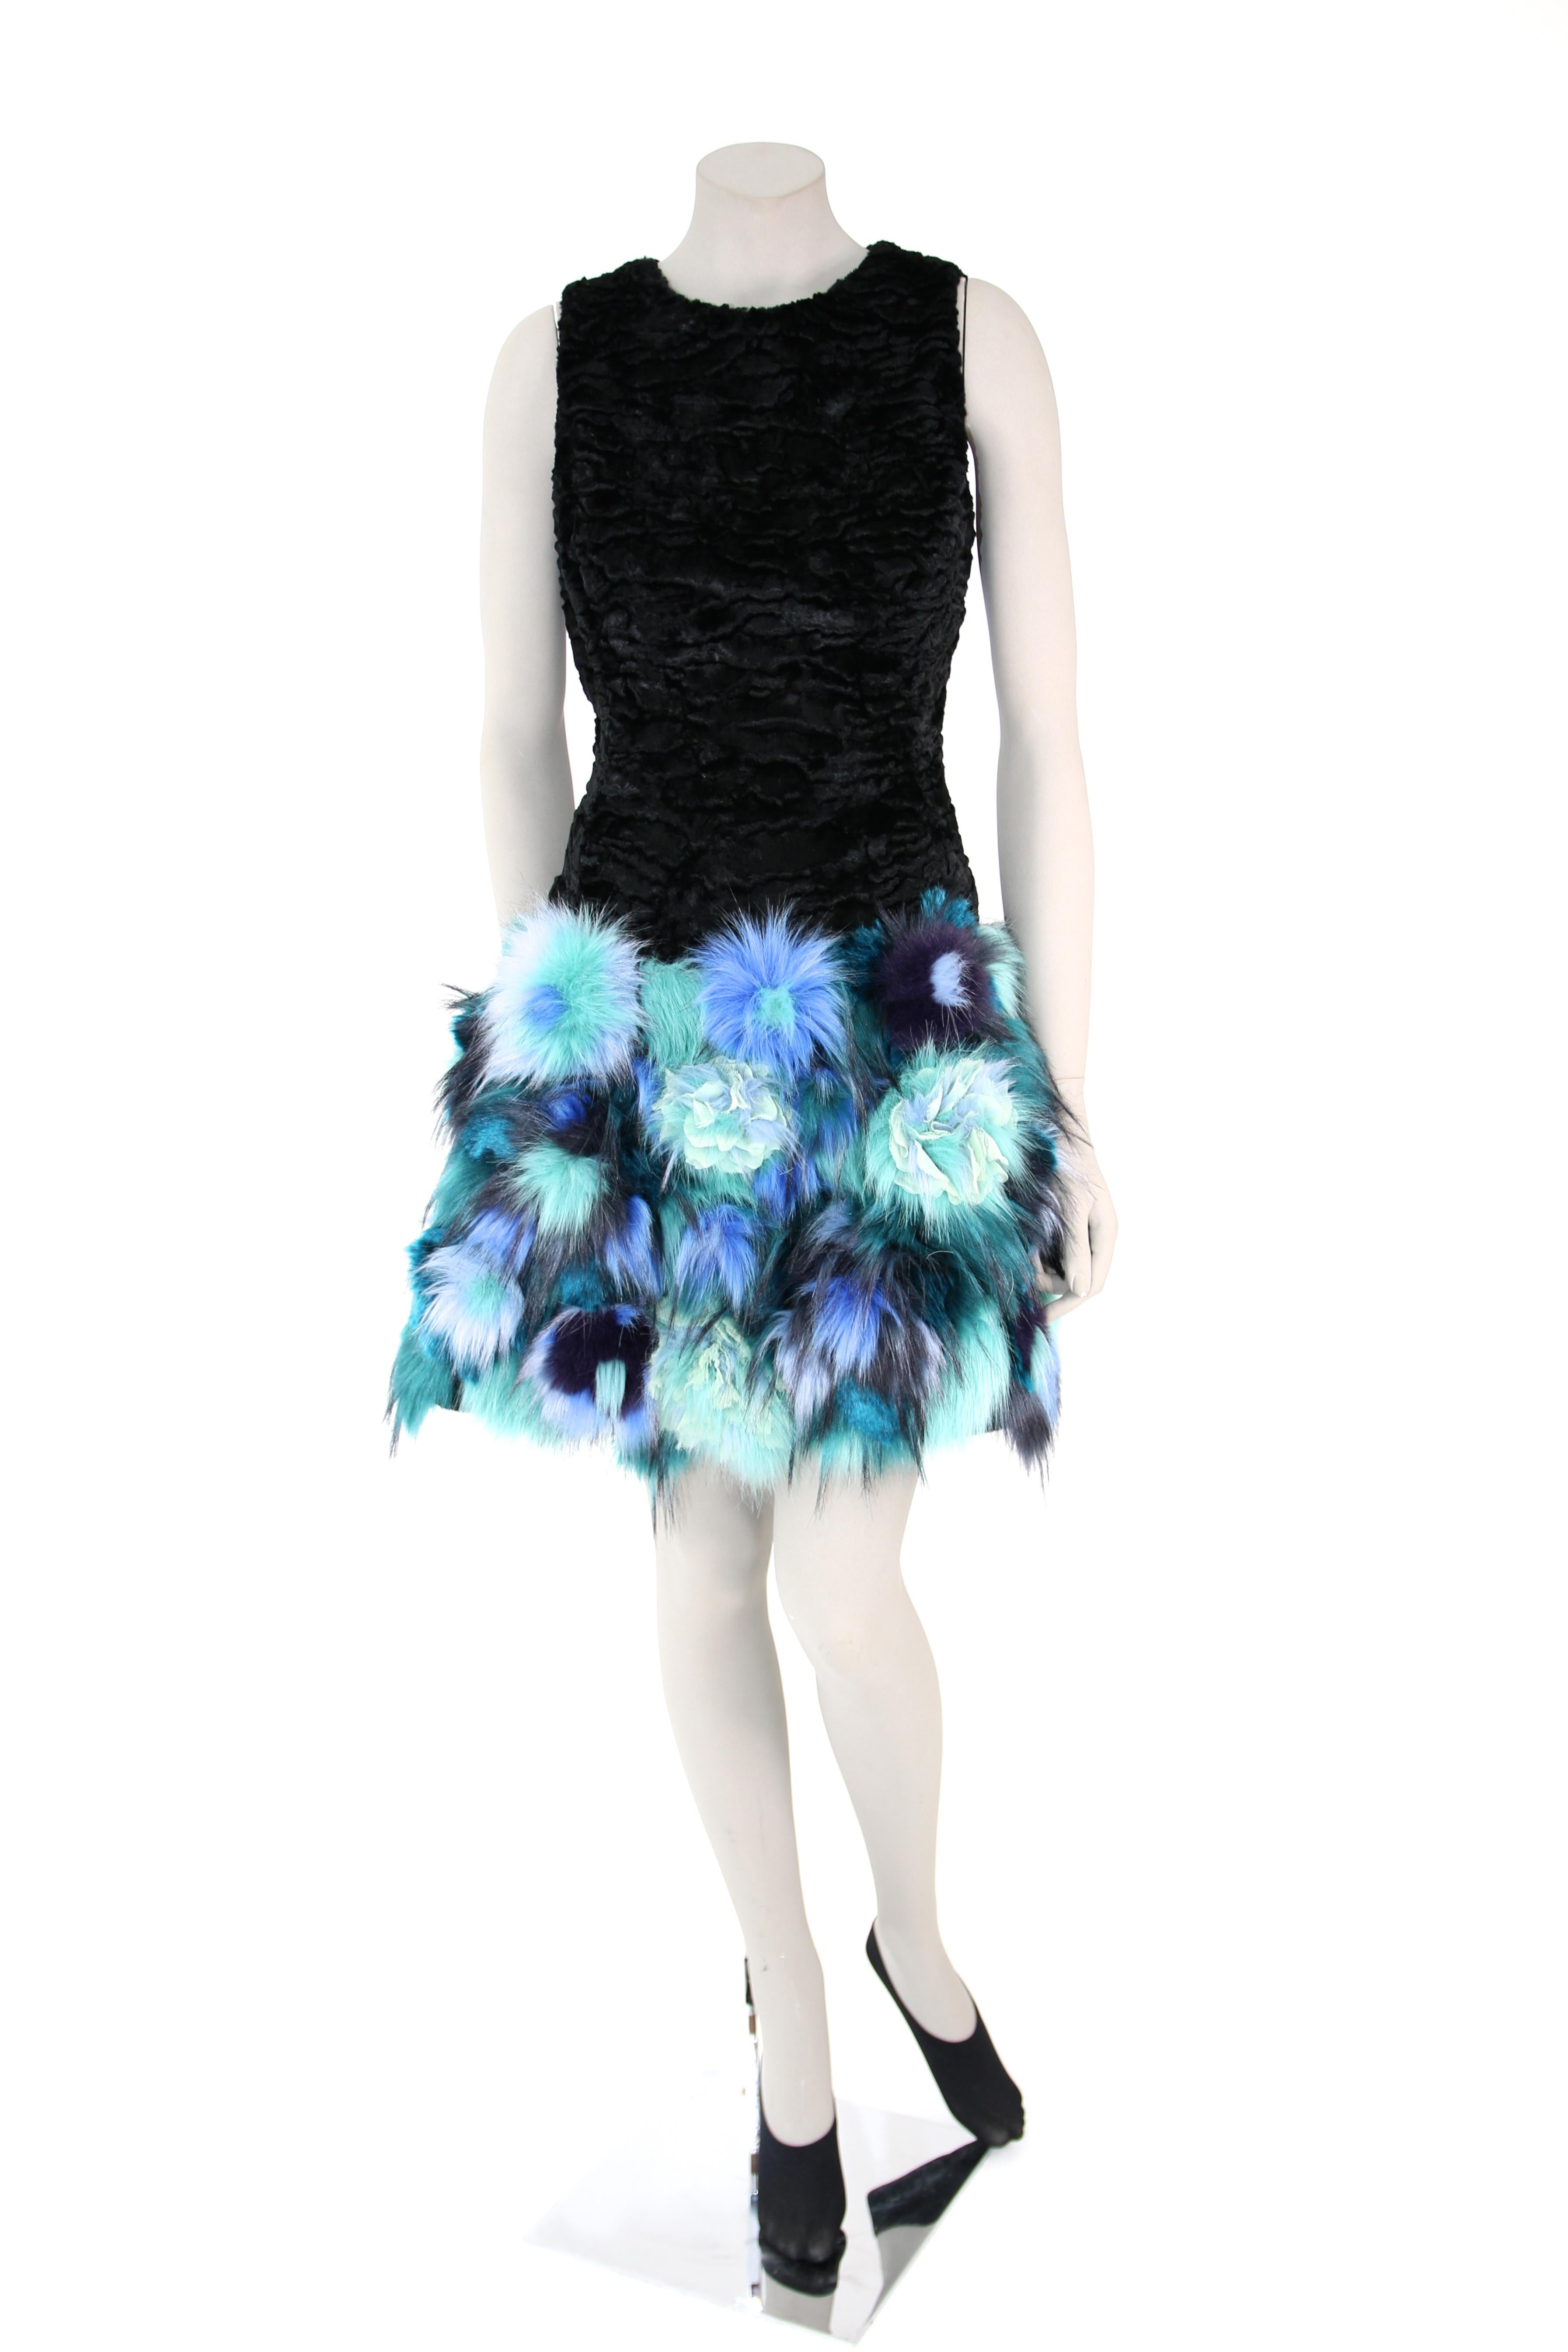 Pelush Black Faux Fur Astrakhan Dress With Three Dimensional Flowers - Small In New Condition For Sale In Greenwich, CT